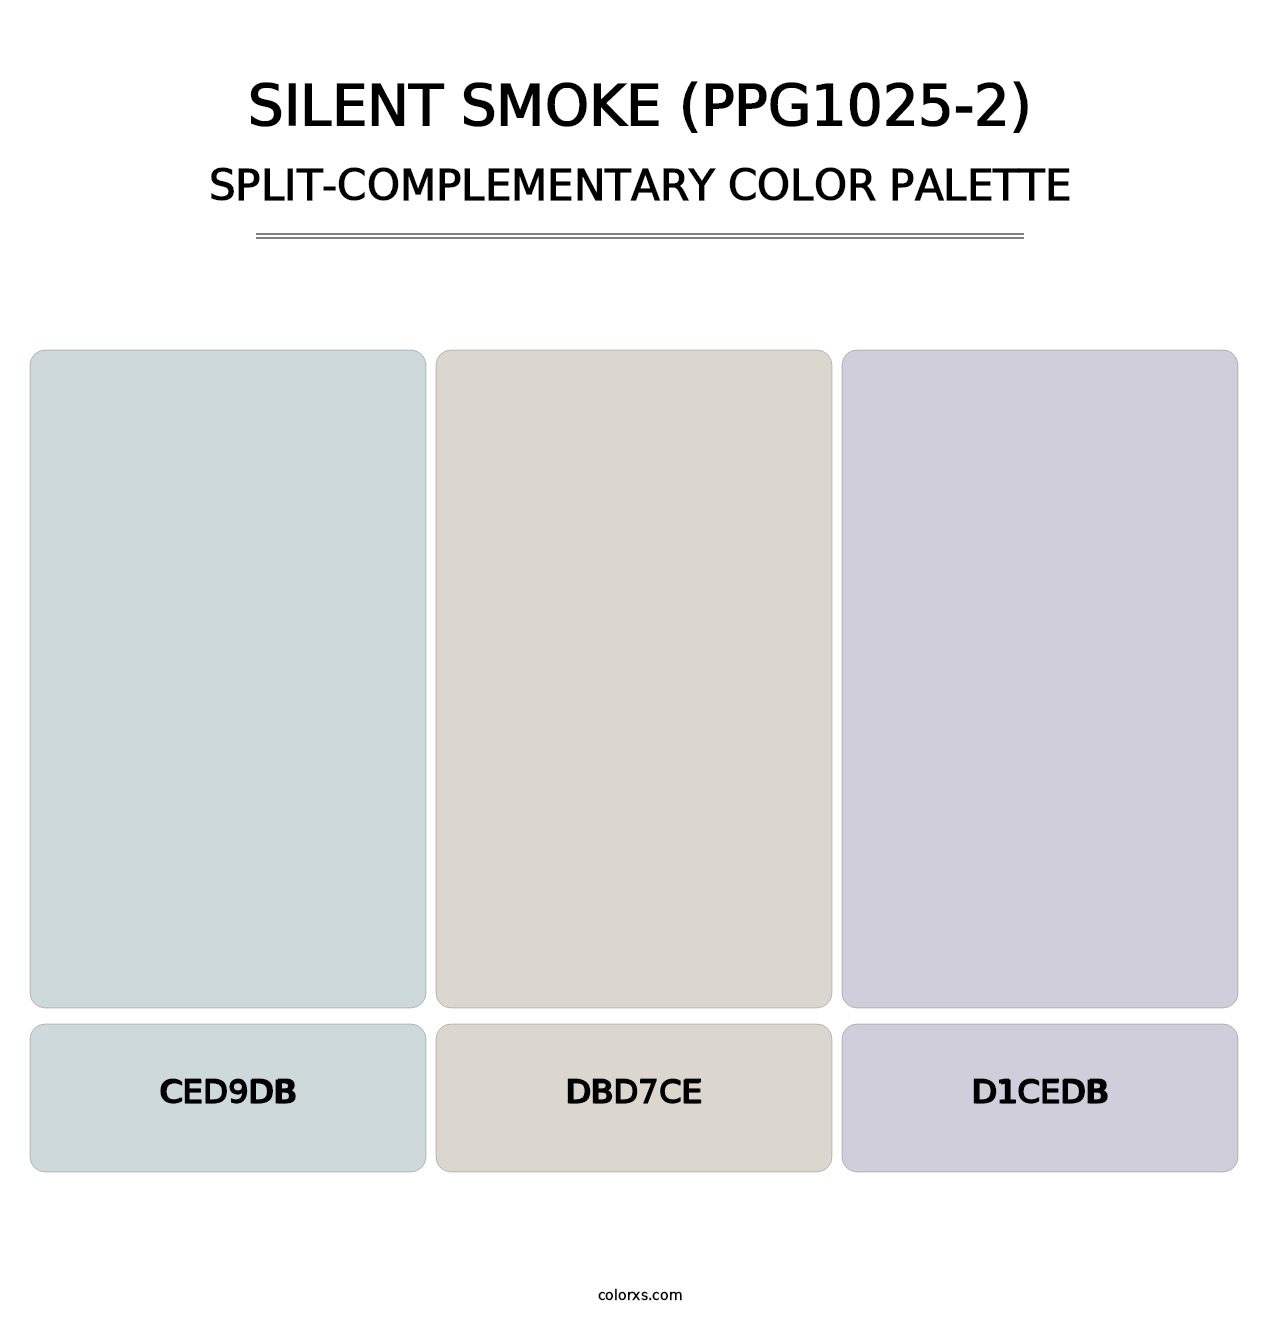 Silent Smoke (PPG1025-2) - Split-Complementary Color Palette